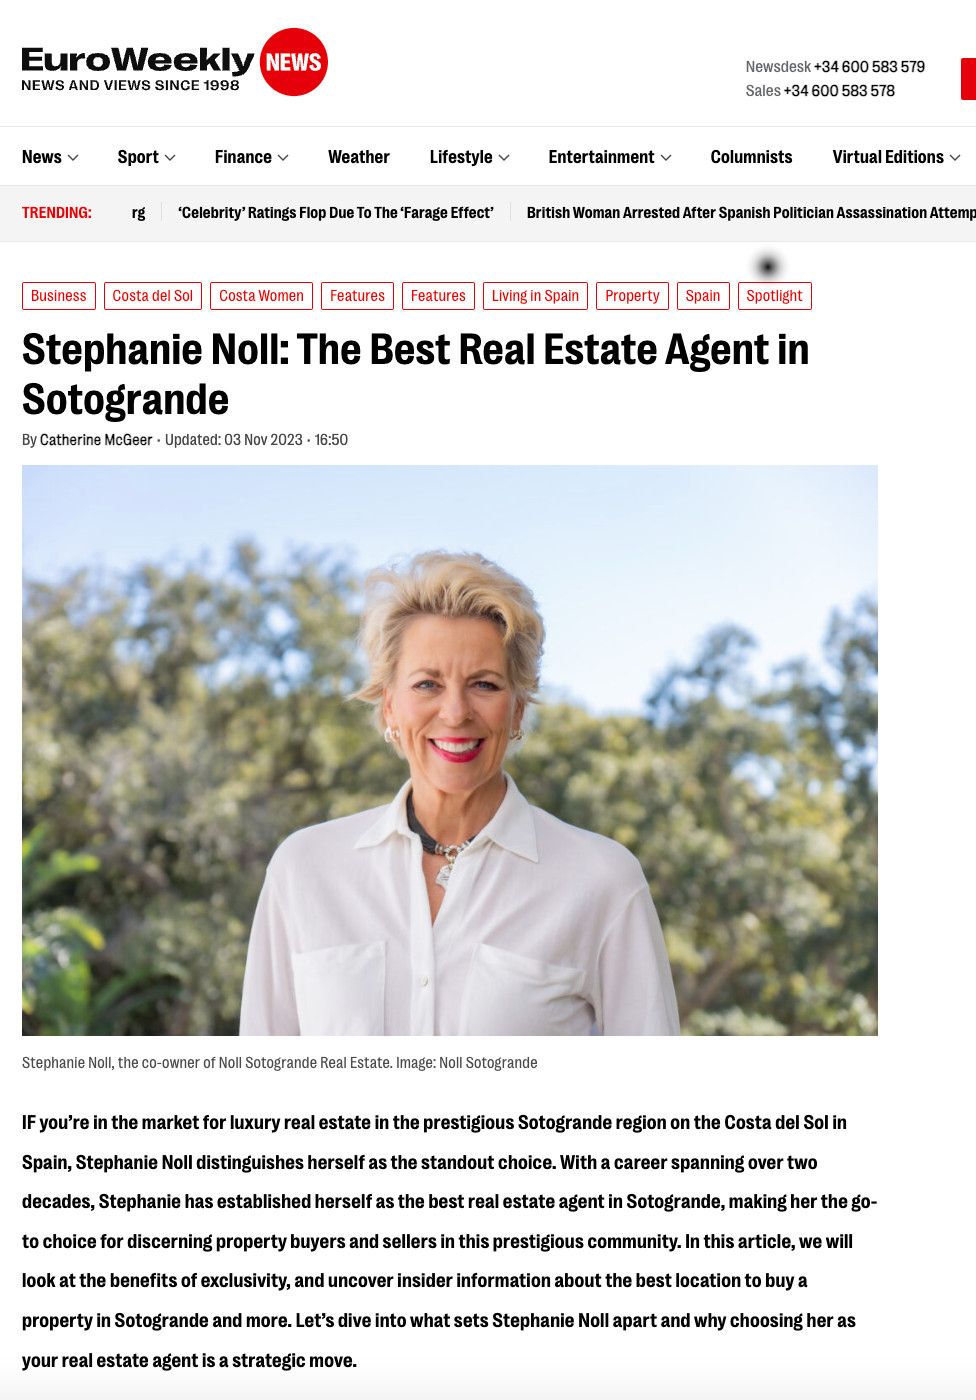 Euro Weekly News - Stephanie the best real estate agent in Sotogrande near Marbella